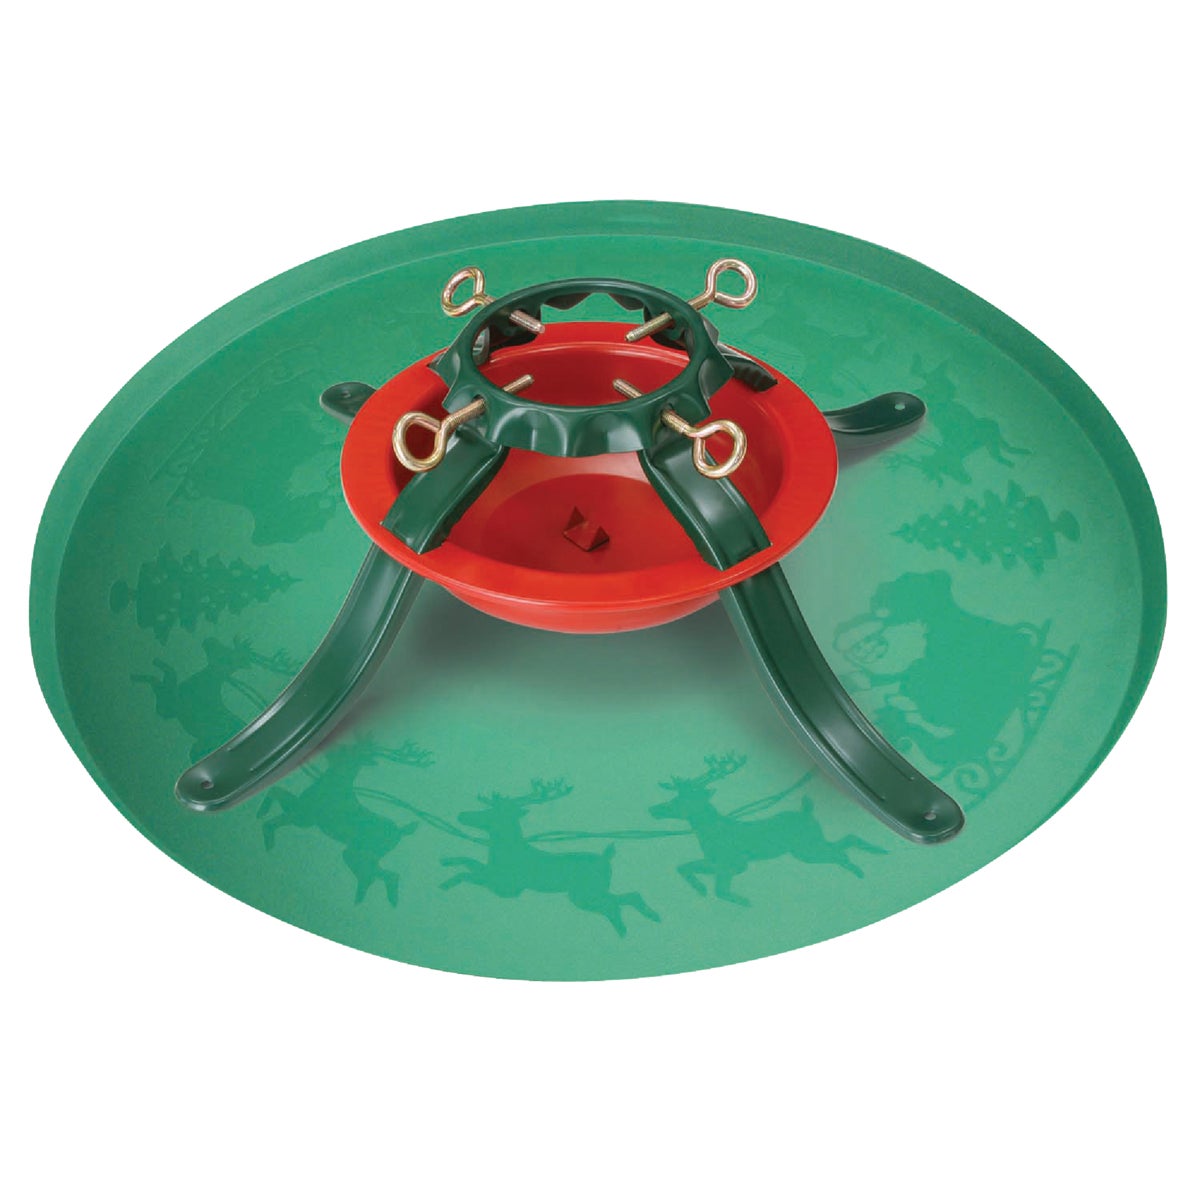 Item 901643, 28-1/2-inch diameter durable resin tree stand tray.